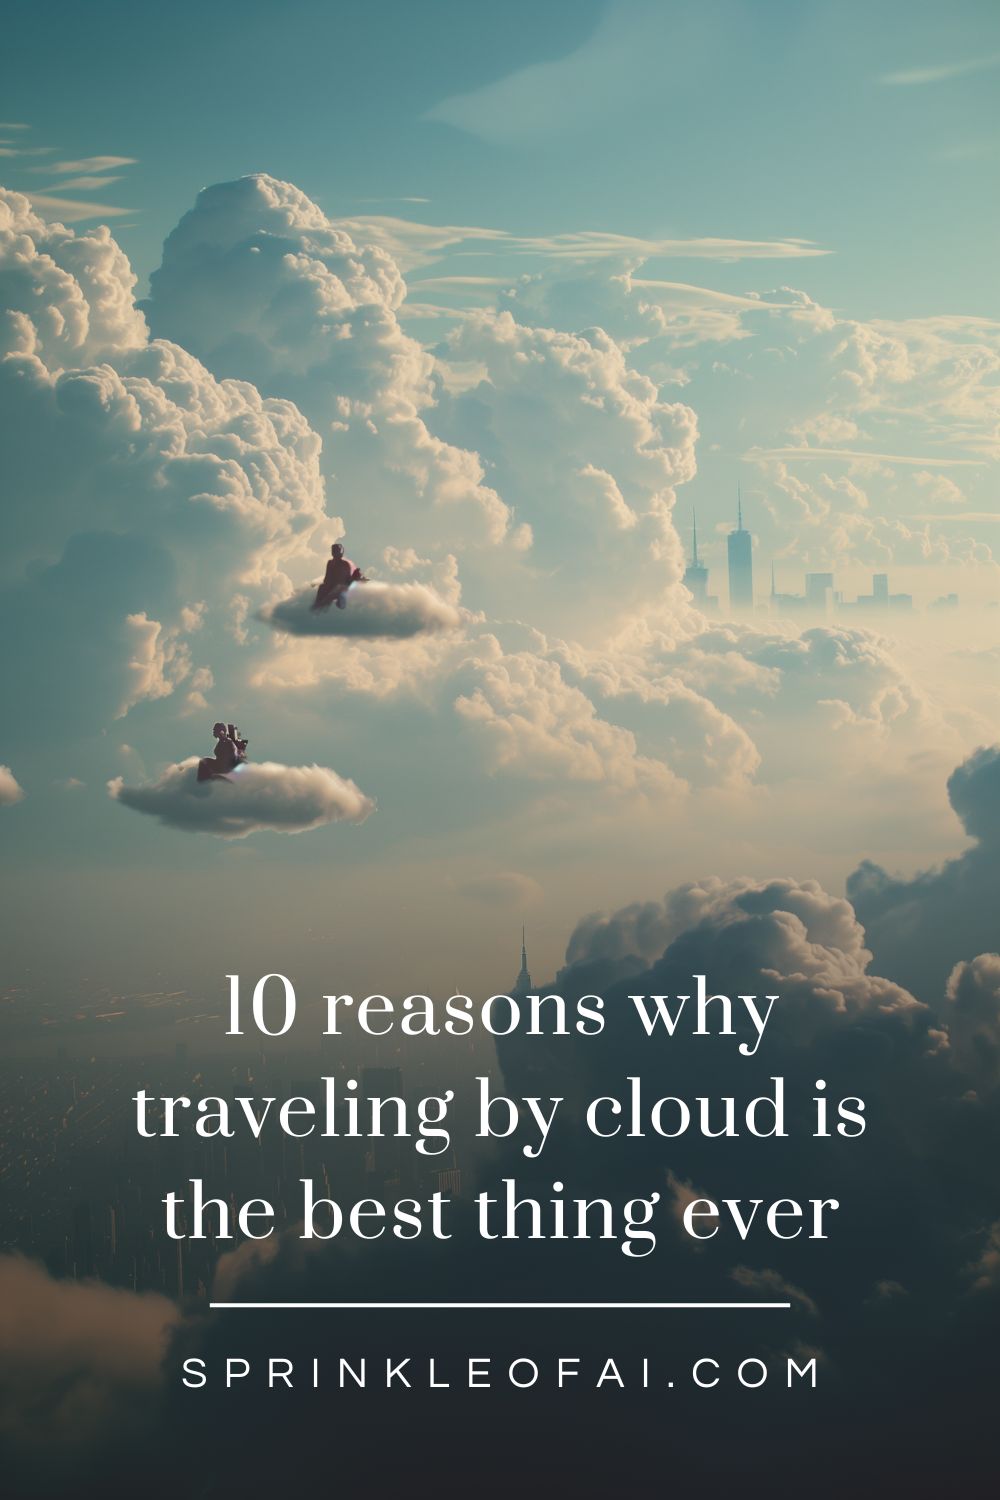 10 Reasons Why Traveling By Cloud Is The Best Thing Ever - Sprinkle of AI - AI ART BLOG